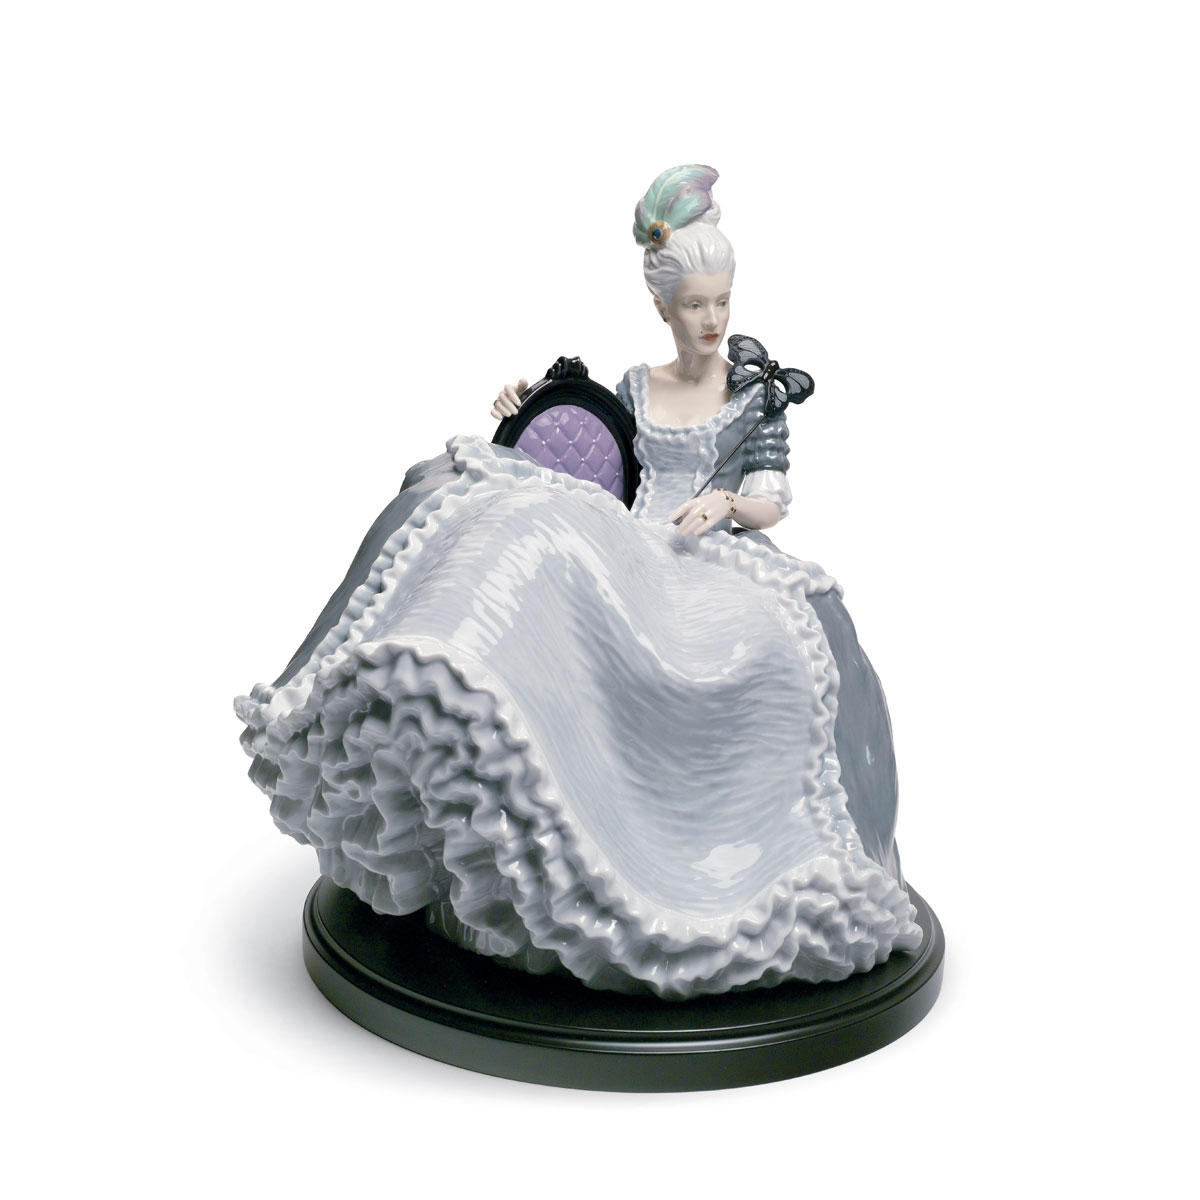 Lladro Classic Sculpture, Rococo Lady At The Ball Figurine